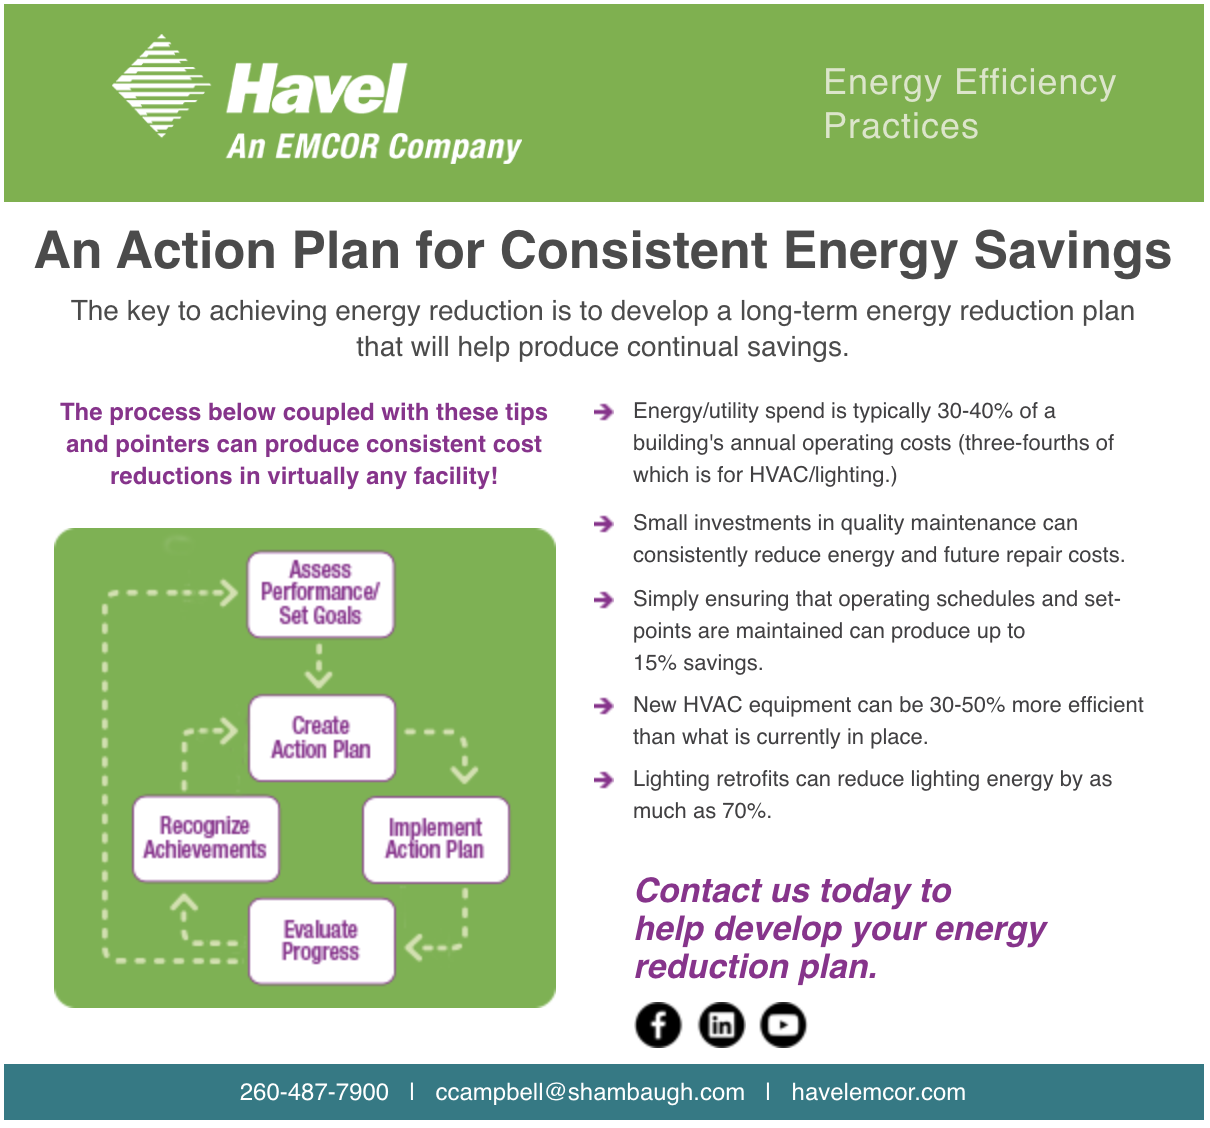 An Action Plan for Consistent Energy Savings